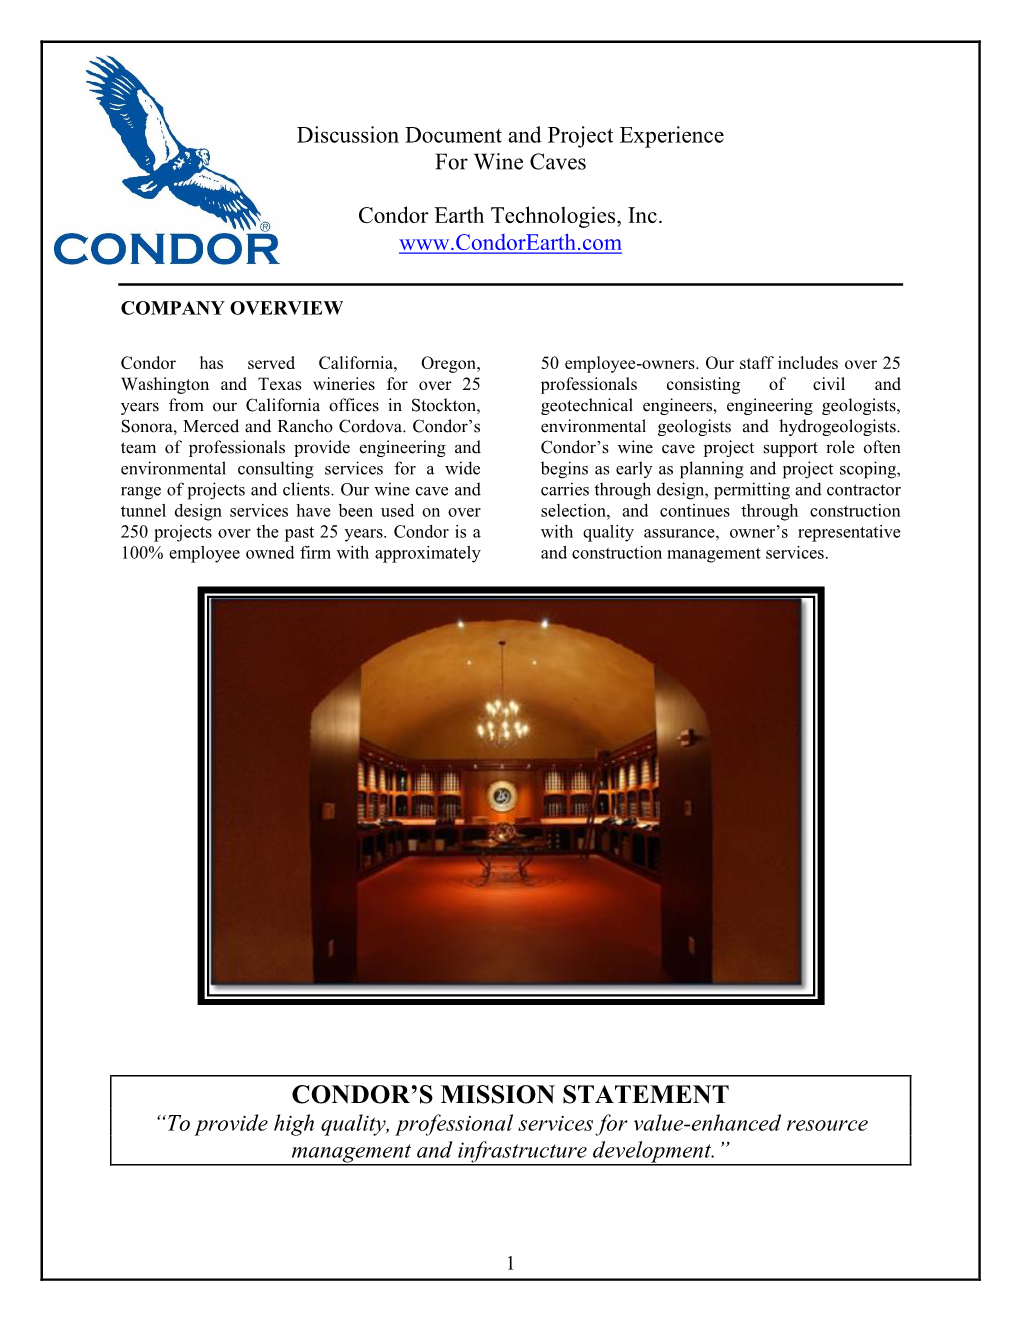 Discussion Document and Project Experience for Wine Caves Condor Earth Technologies, Inc